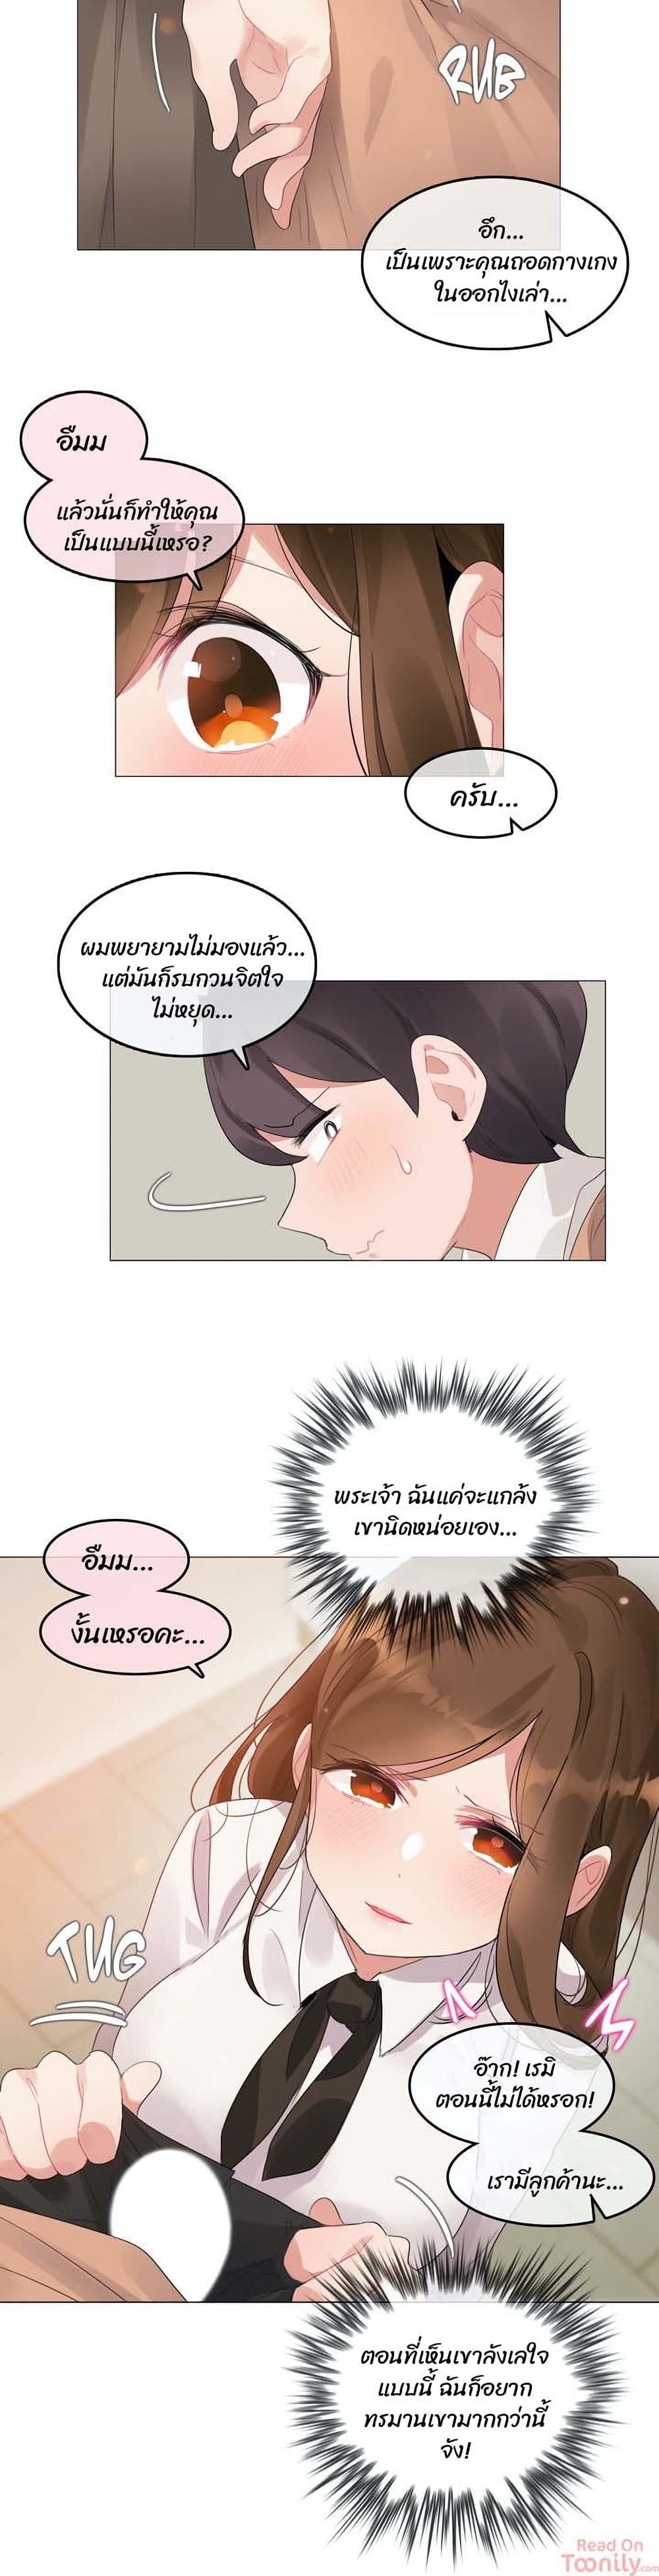 A Pervert's Daily Life 84 (12)